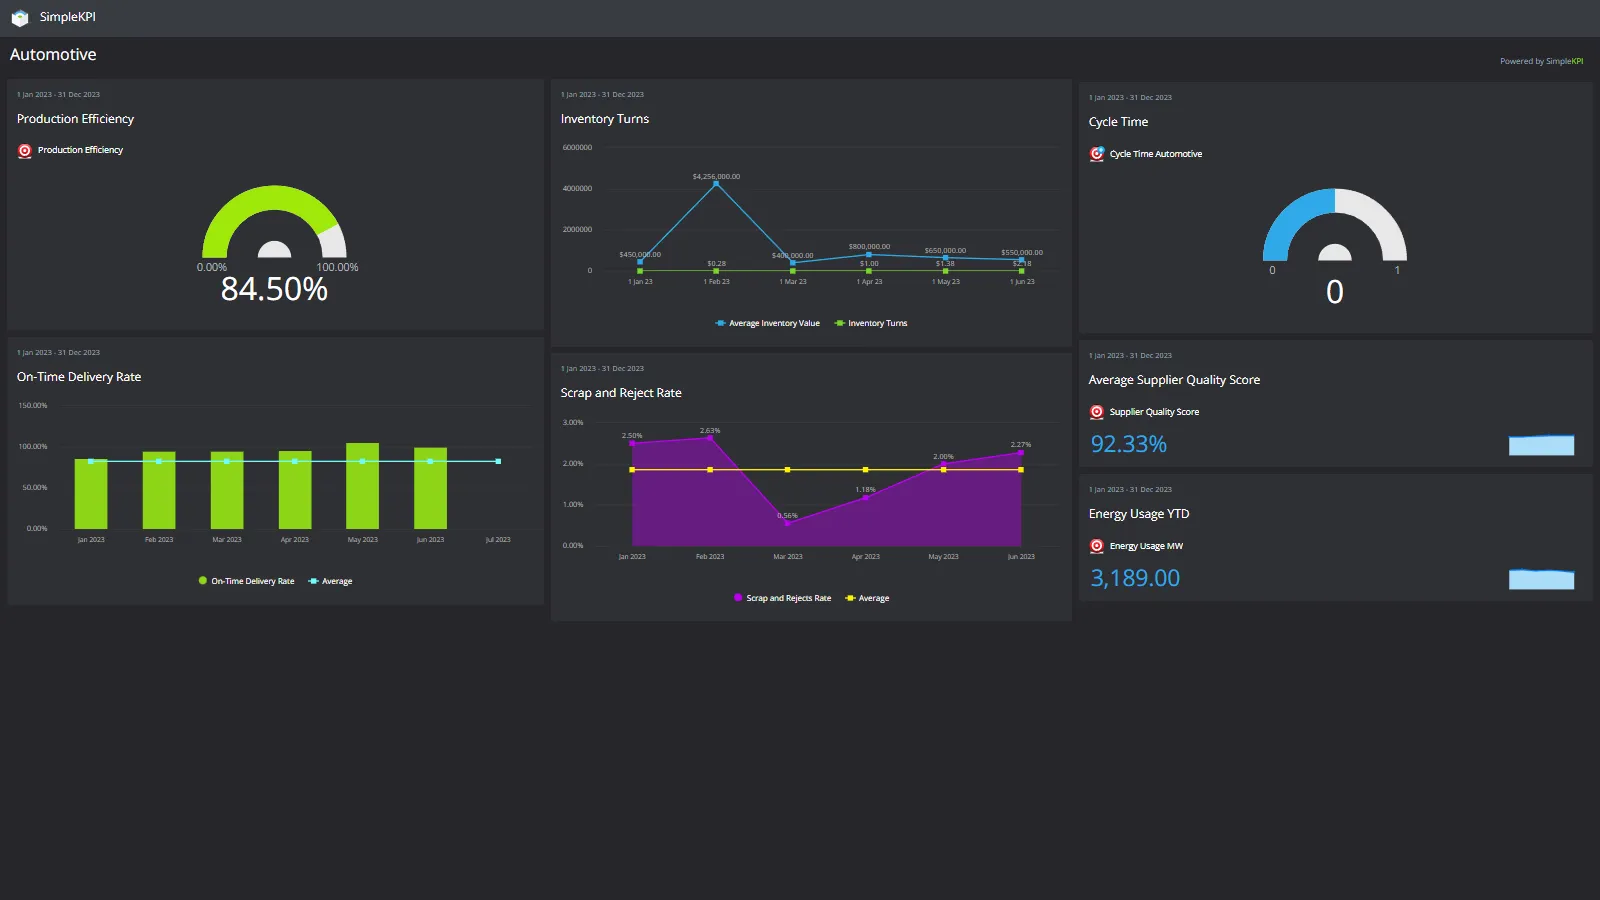 A dark-themed digital dashboard representing KPIs for the Automotive industry in charts and graphs.